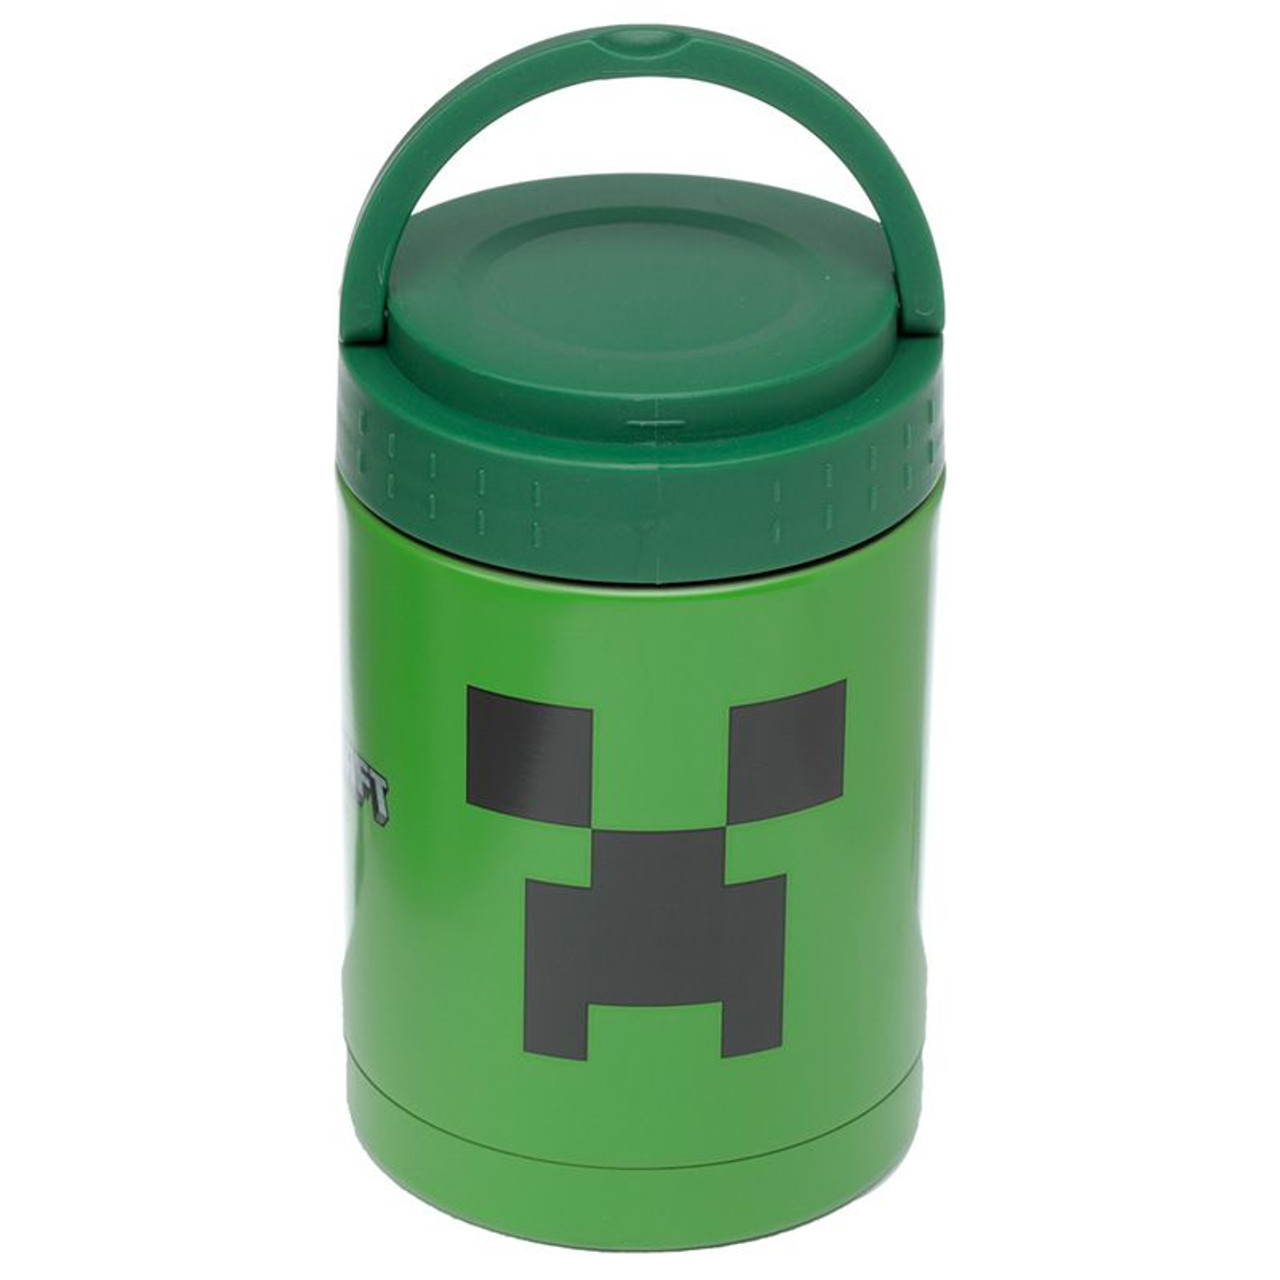 Minecraft Faces Hot & Cold Digital Thermometer Bottle